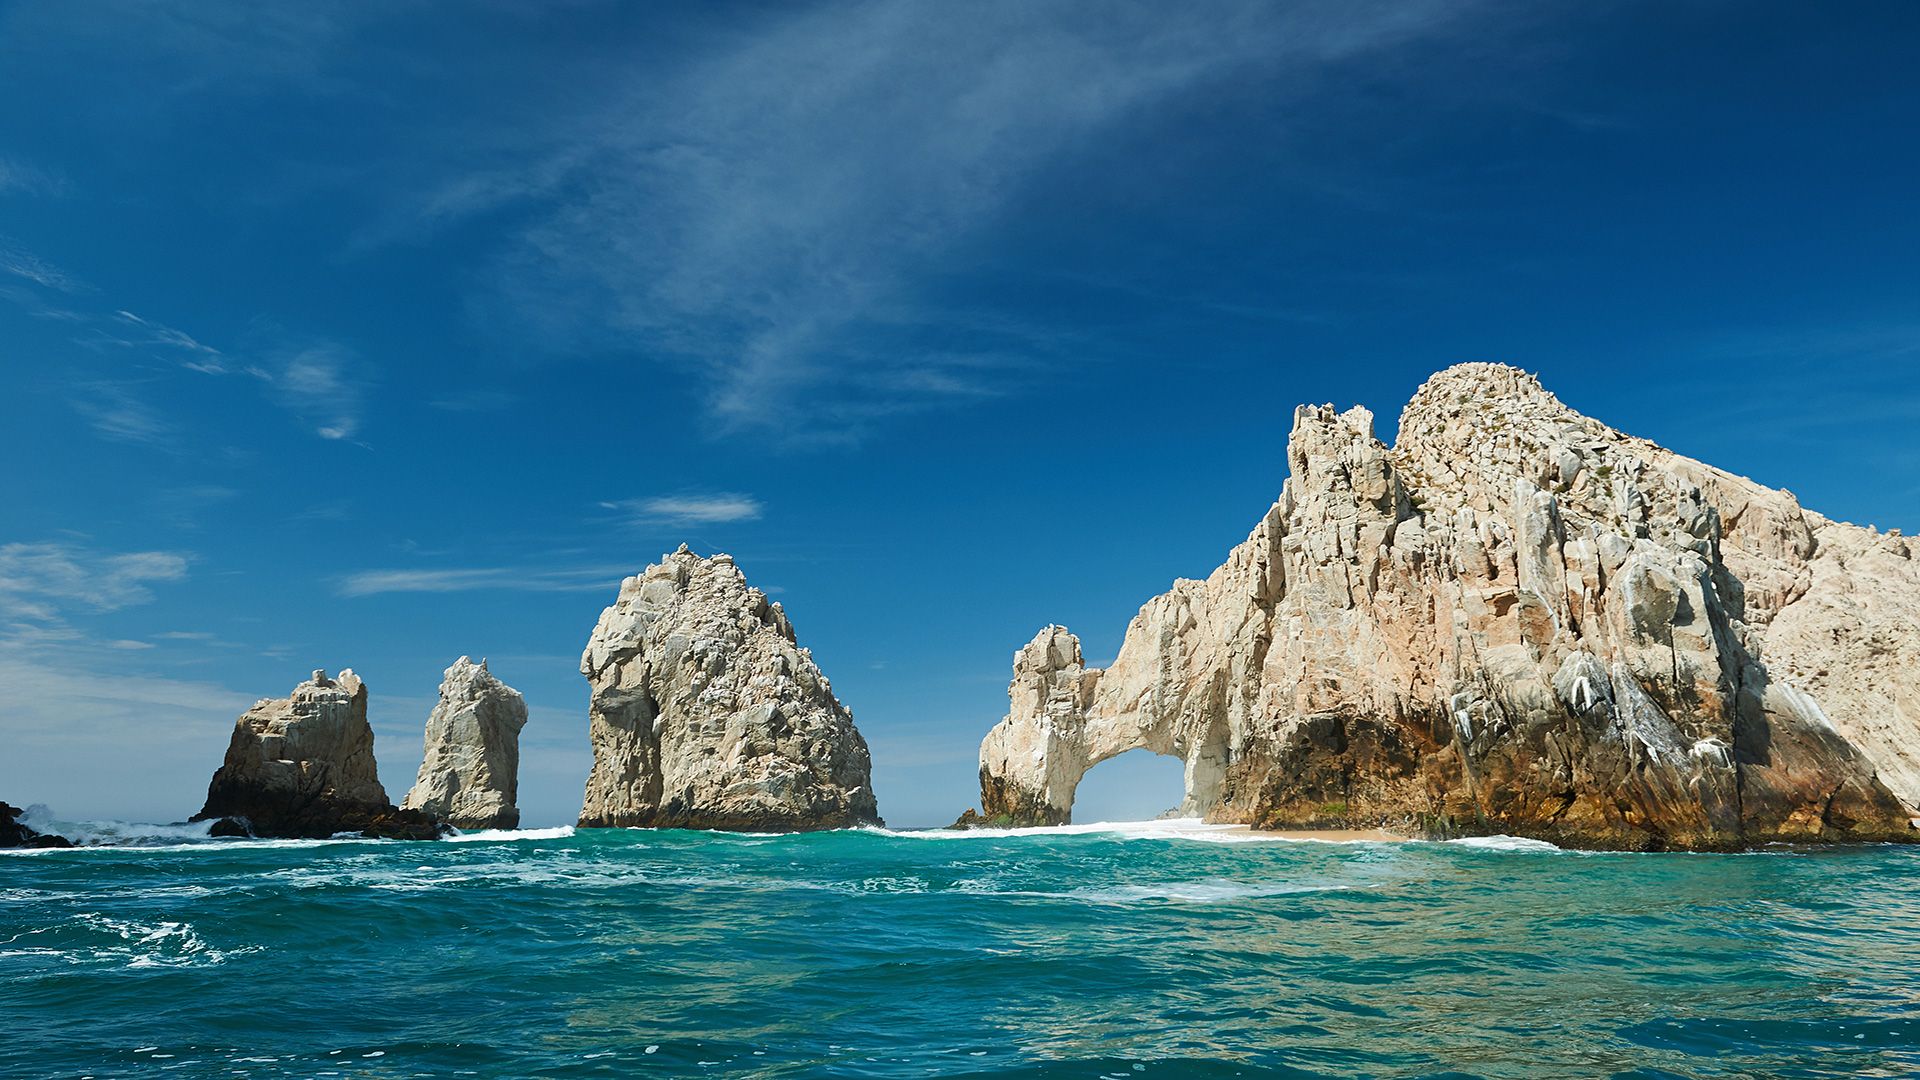 Difference Between San Jose del Cabo and Cabo San Lucas